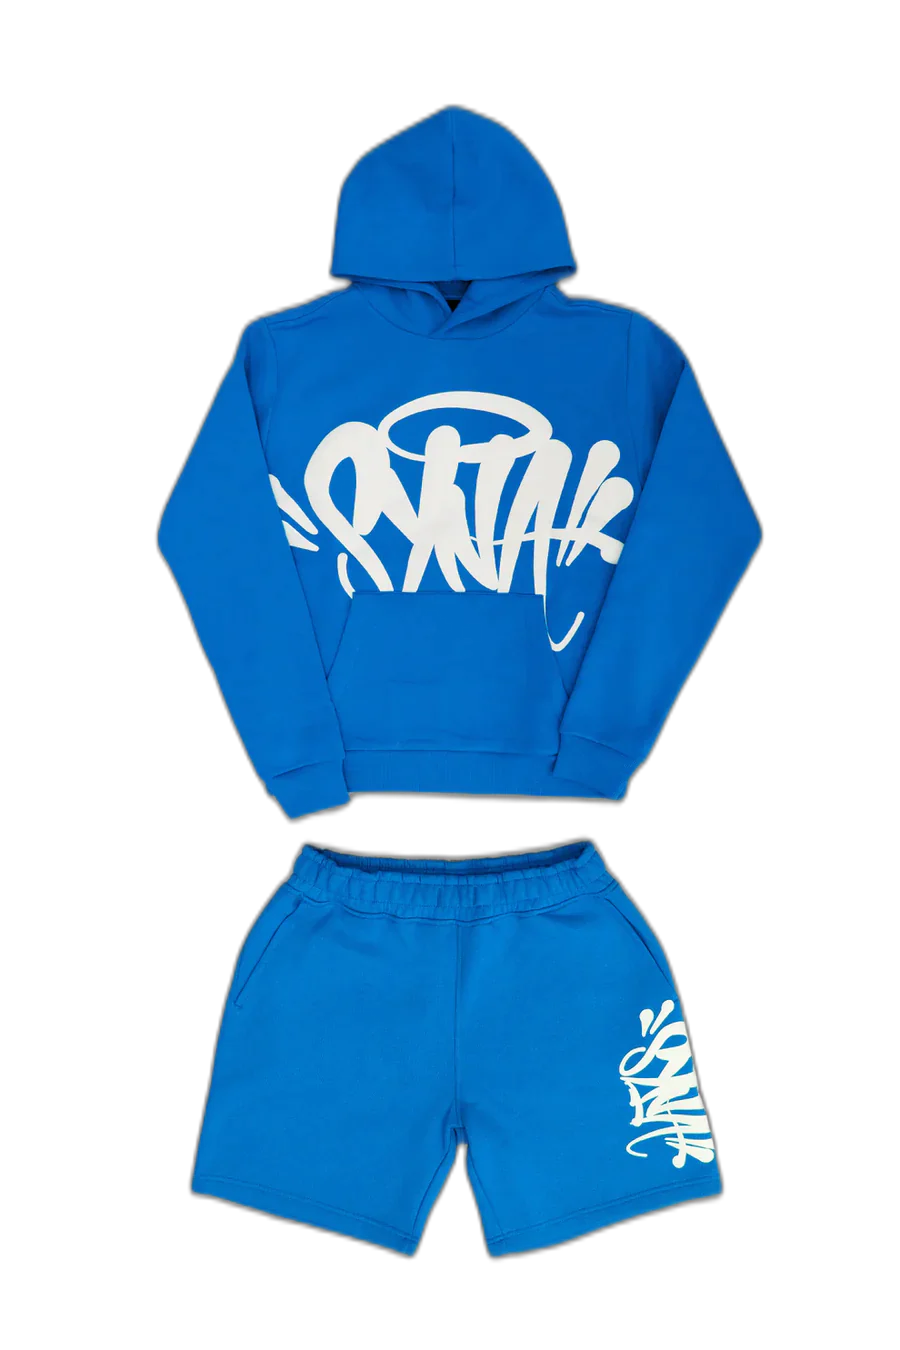 Team Syna Hood Twinset - Blue and Front